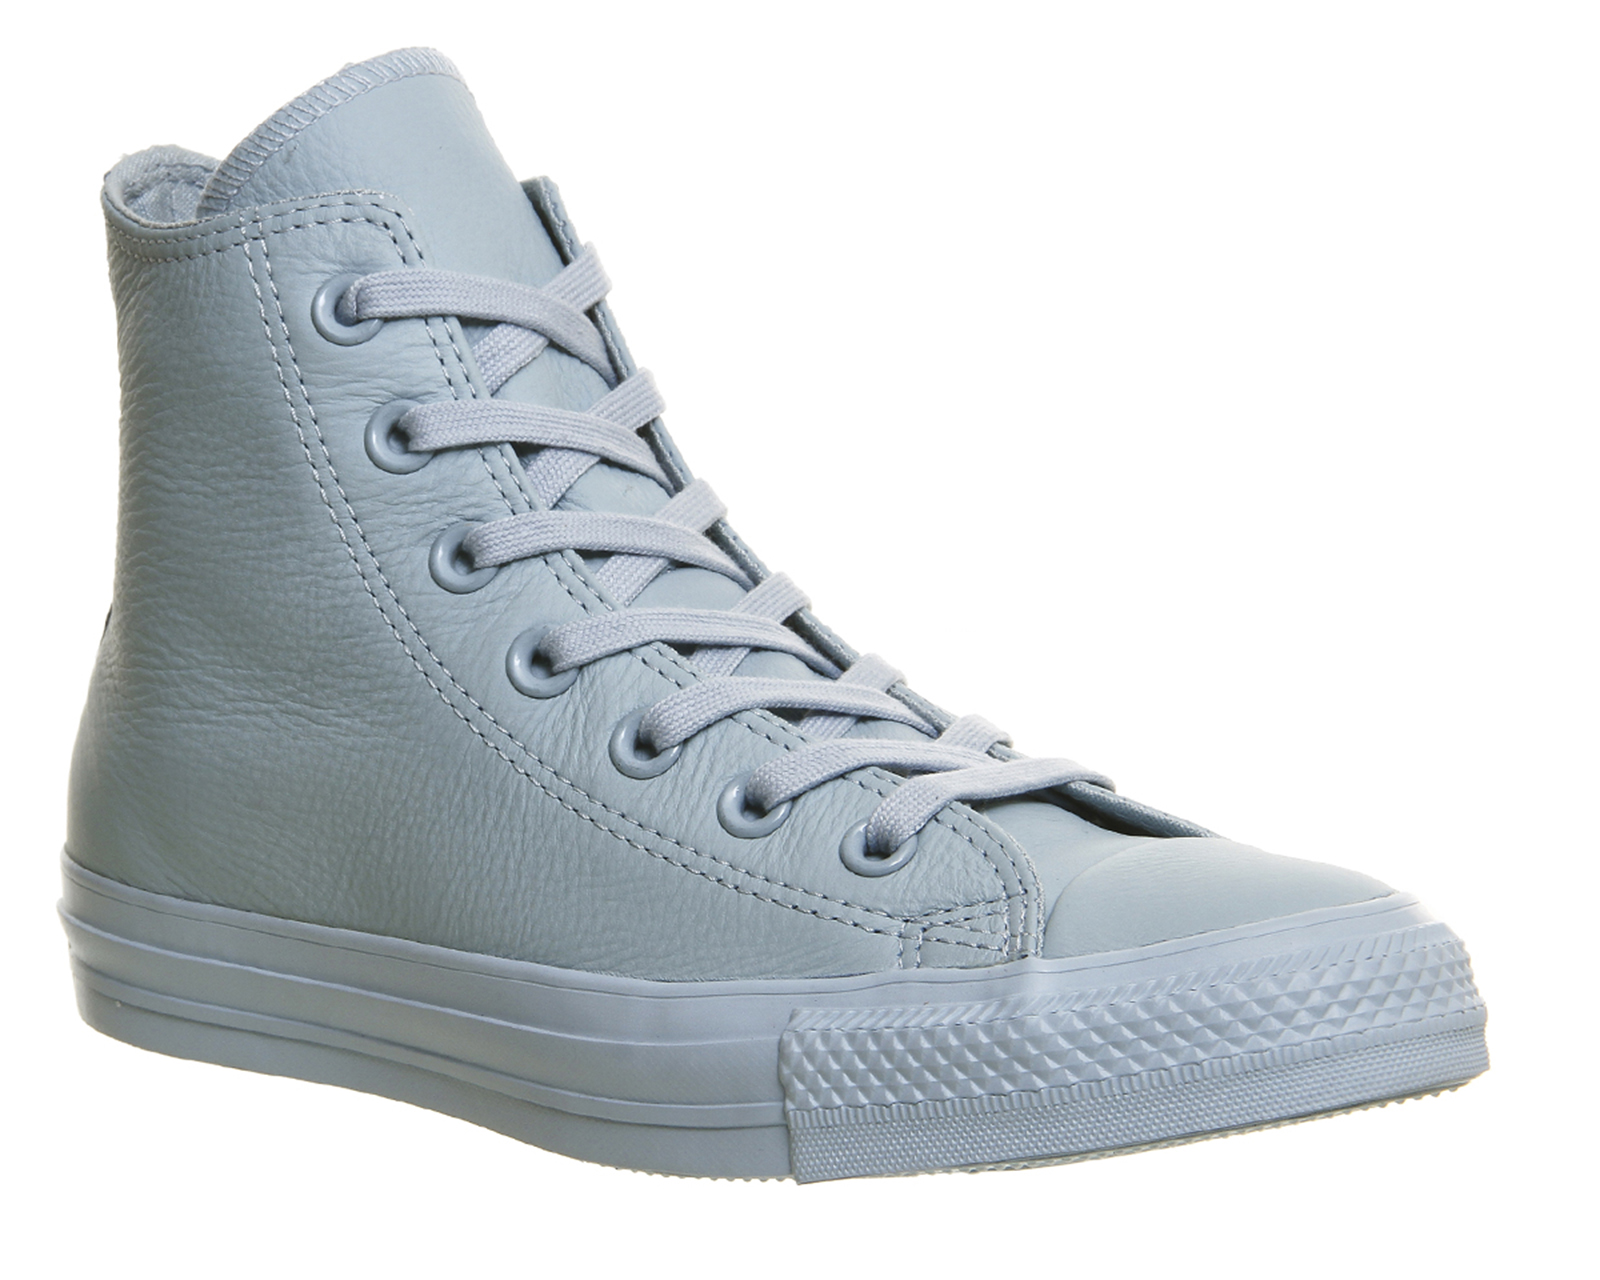 Converse All Star Hi Leather Baby Blue - Unisex Sports